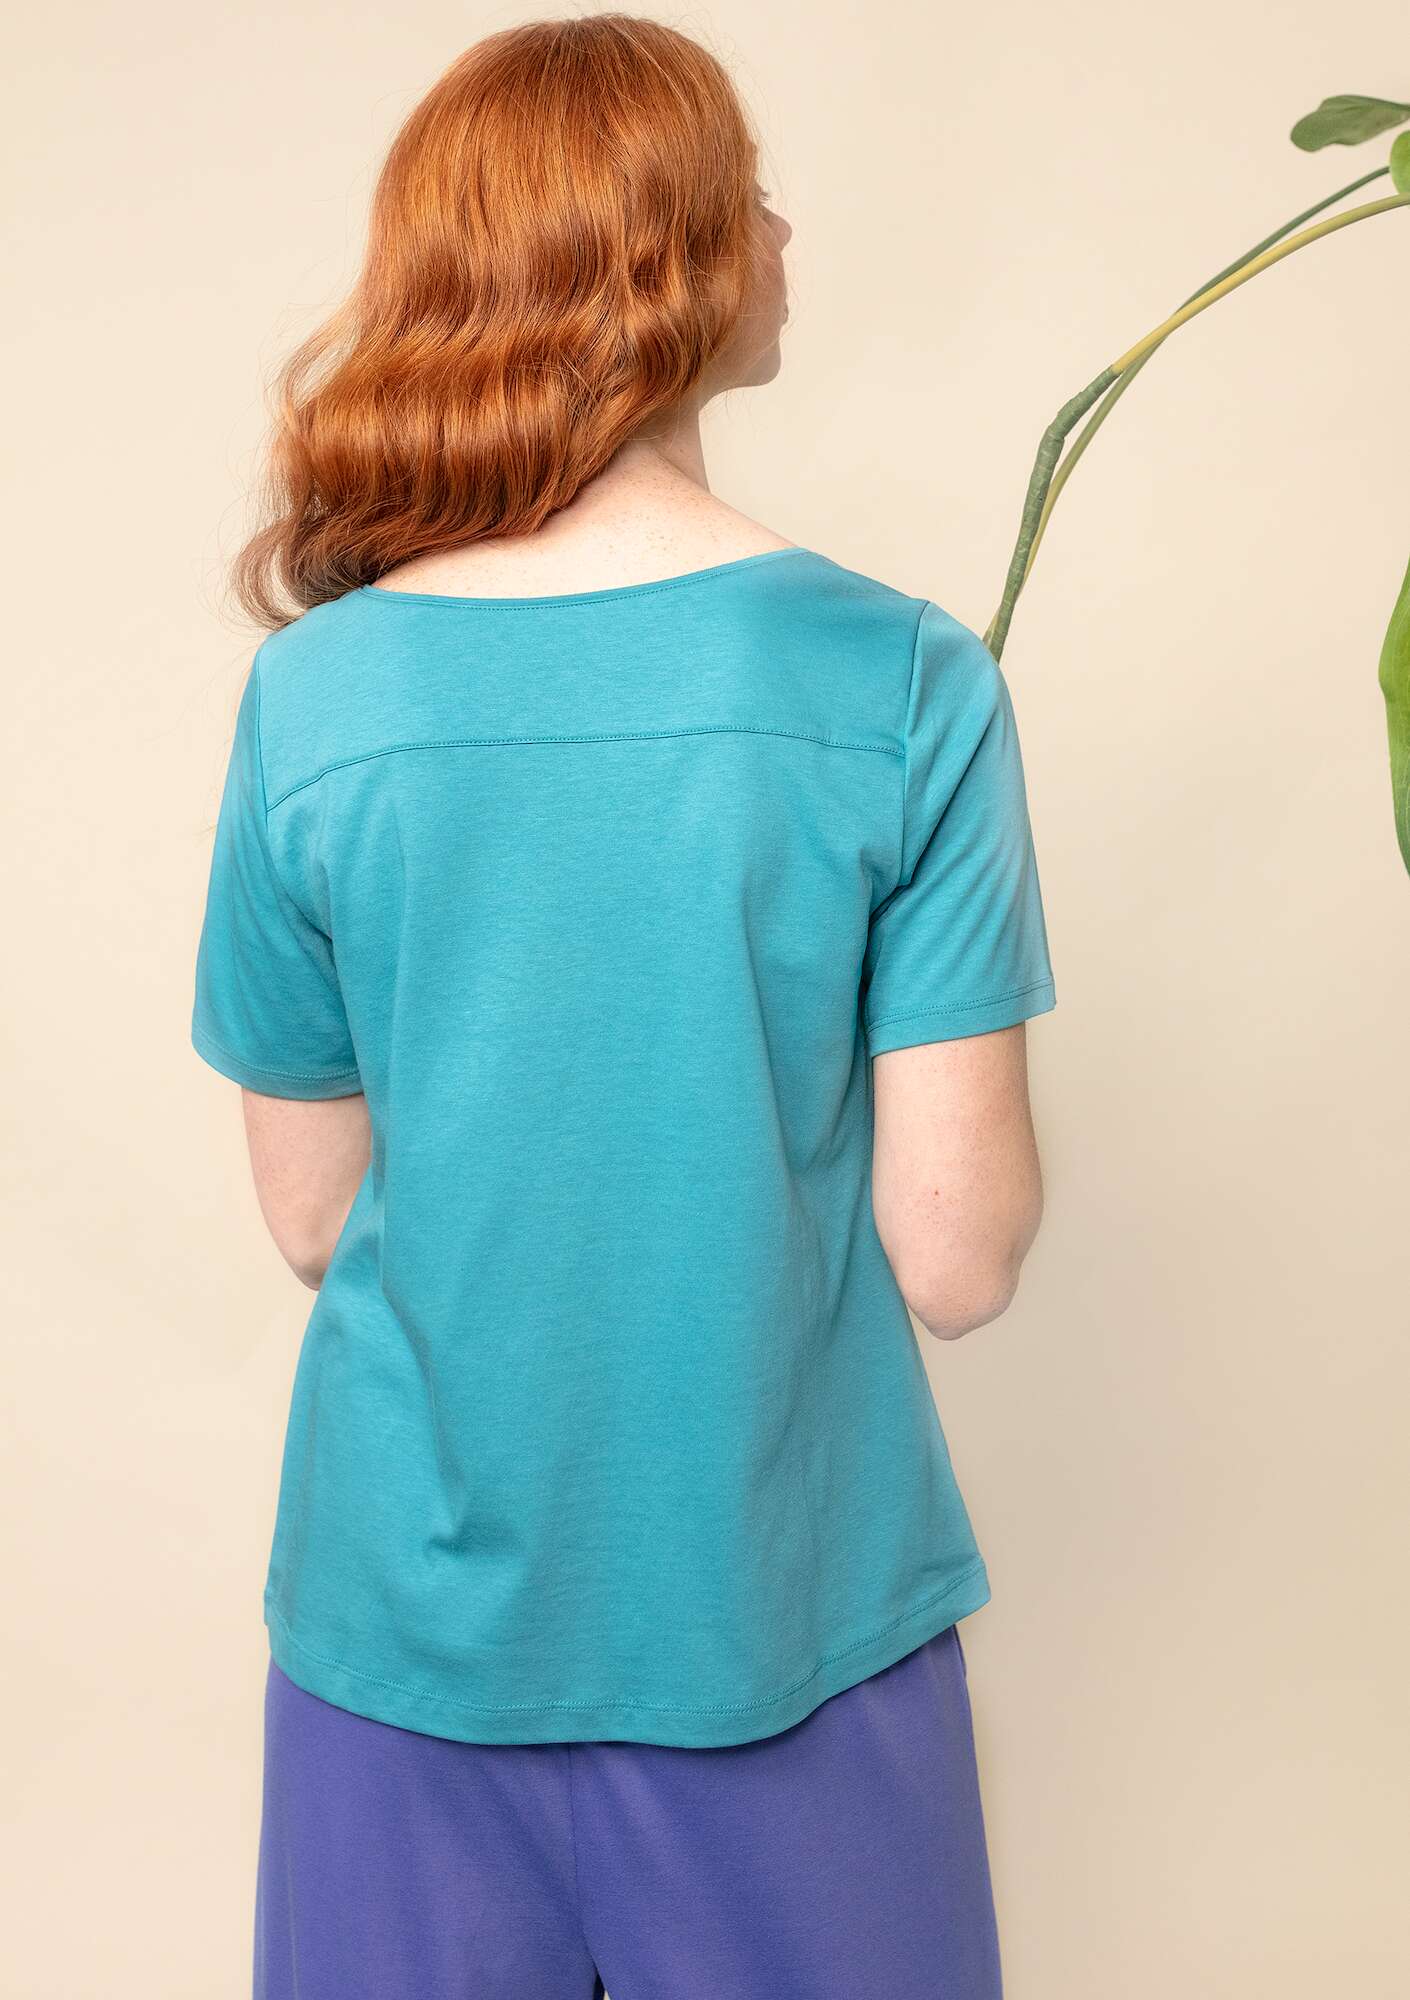 Top made of organic cotton/modal turquoise